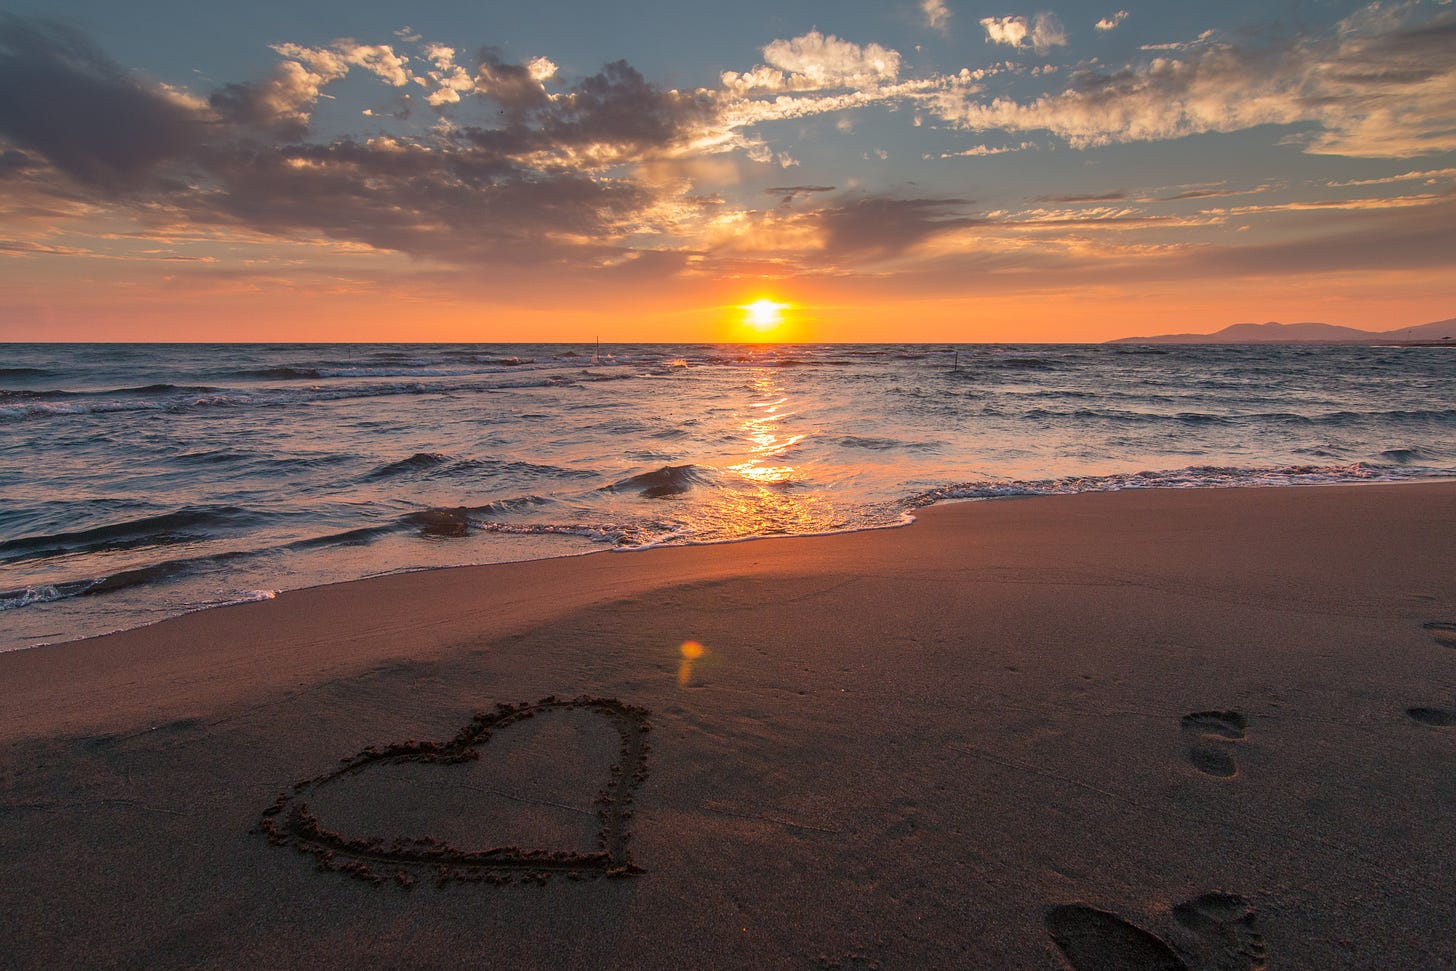 The sun setting on a seashore with a heart drawn in the sand.